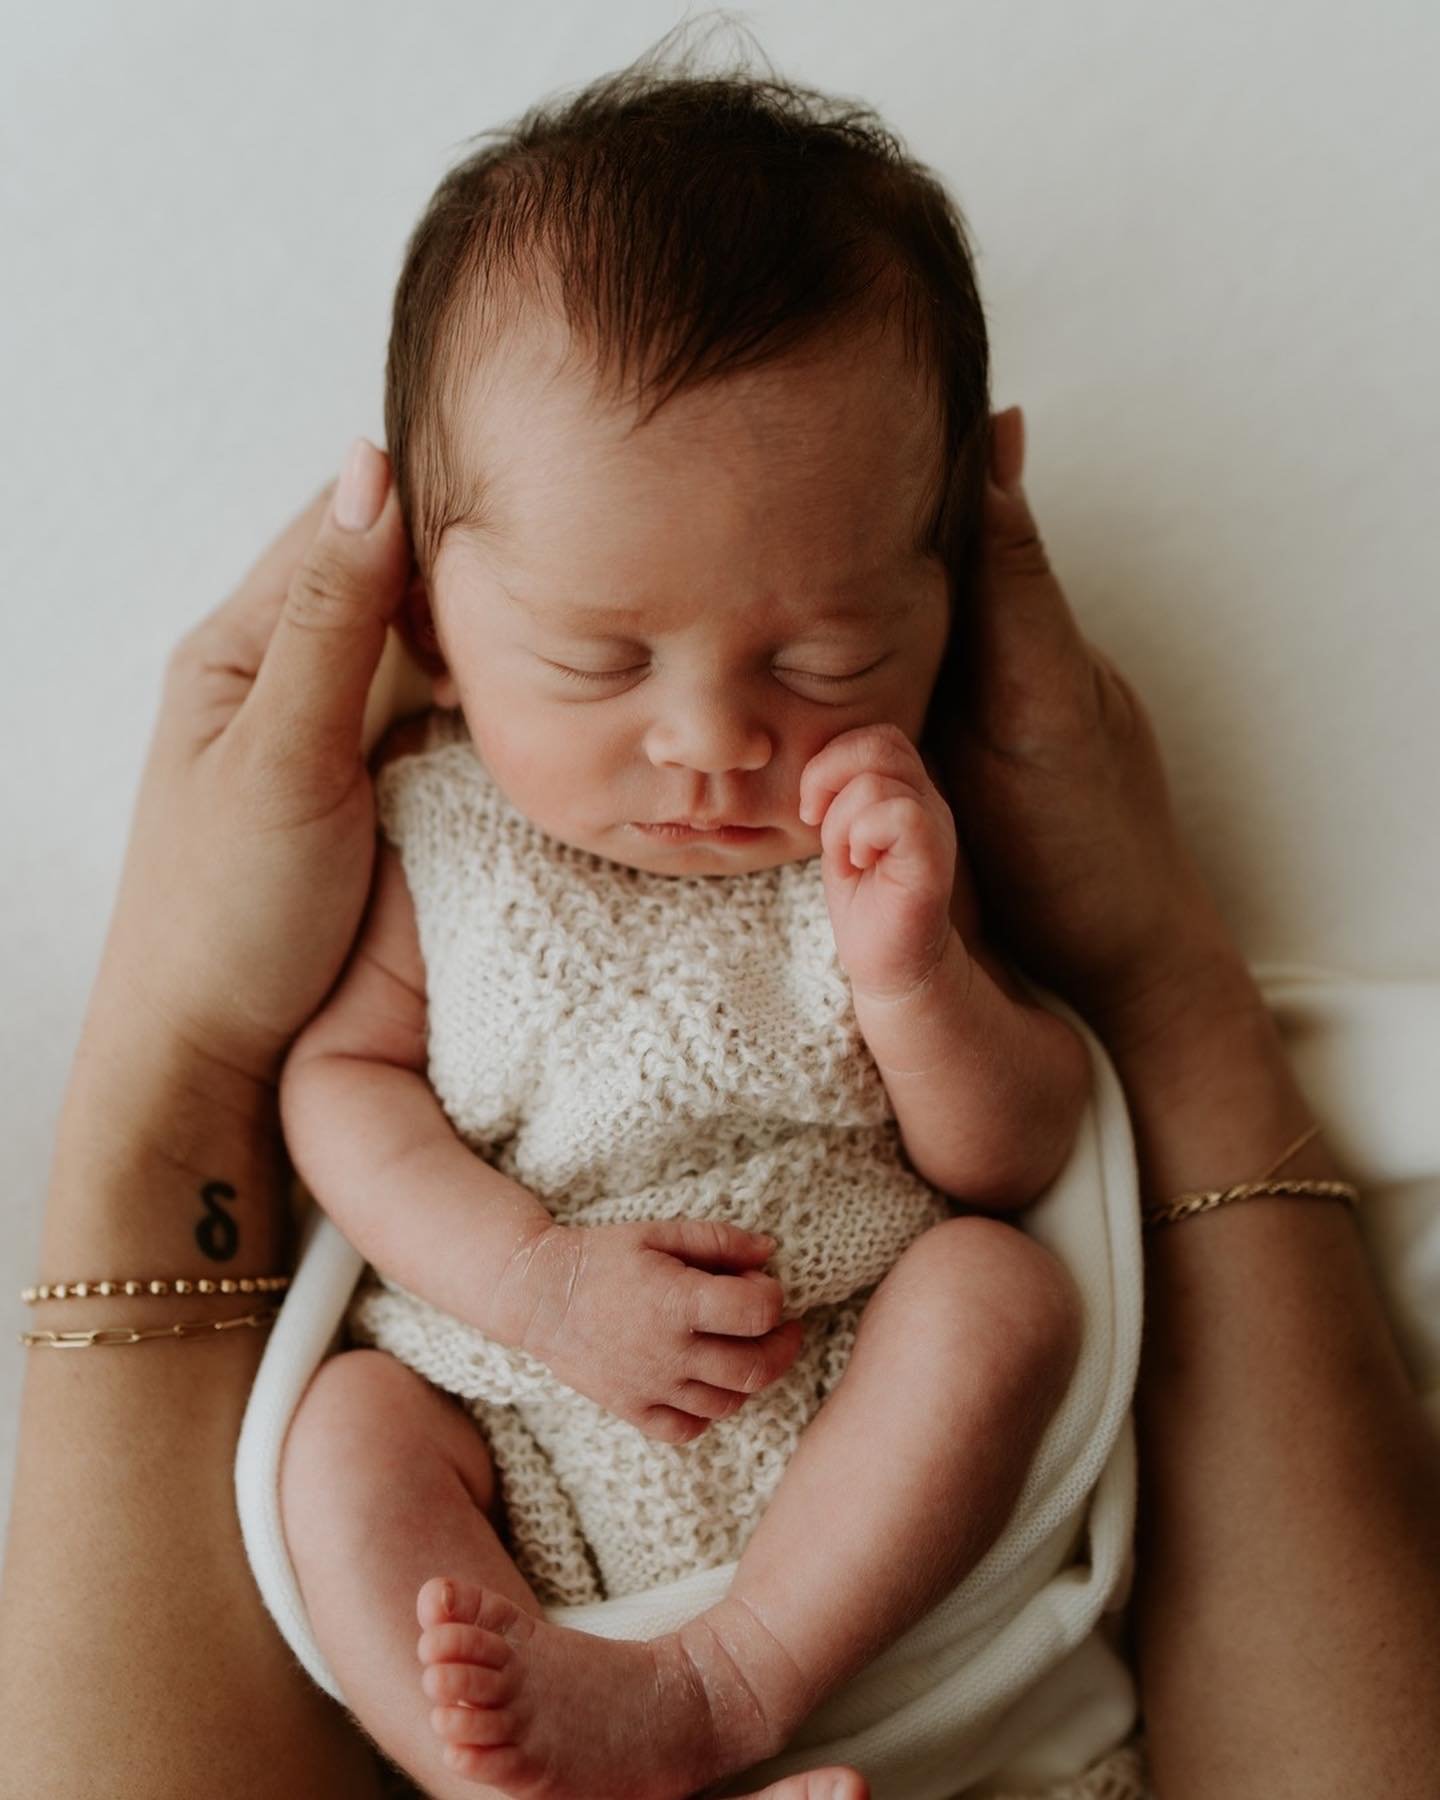 If you are looking to capture &lsquo;the baby in my arms&rsquo; moments you are in the right place. 

We are on a mission to help you to remember those early days and how tiny and vulnerable your baby is so you can treasure this moment forever! 

Her